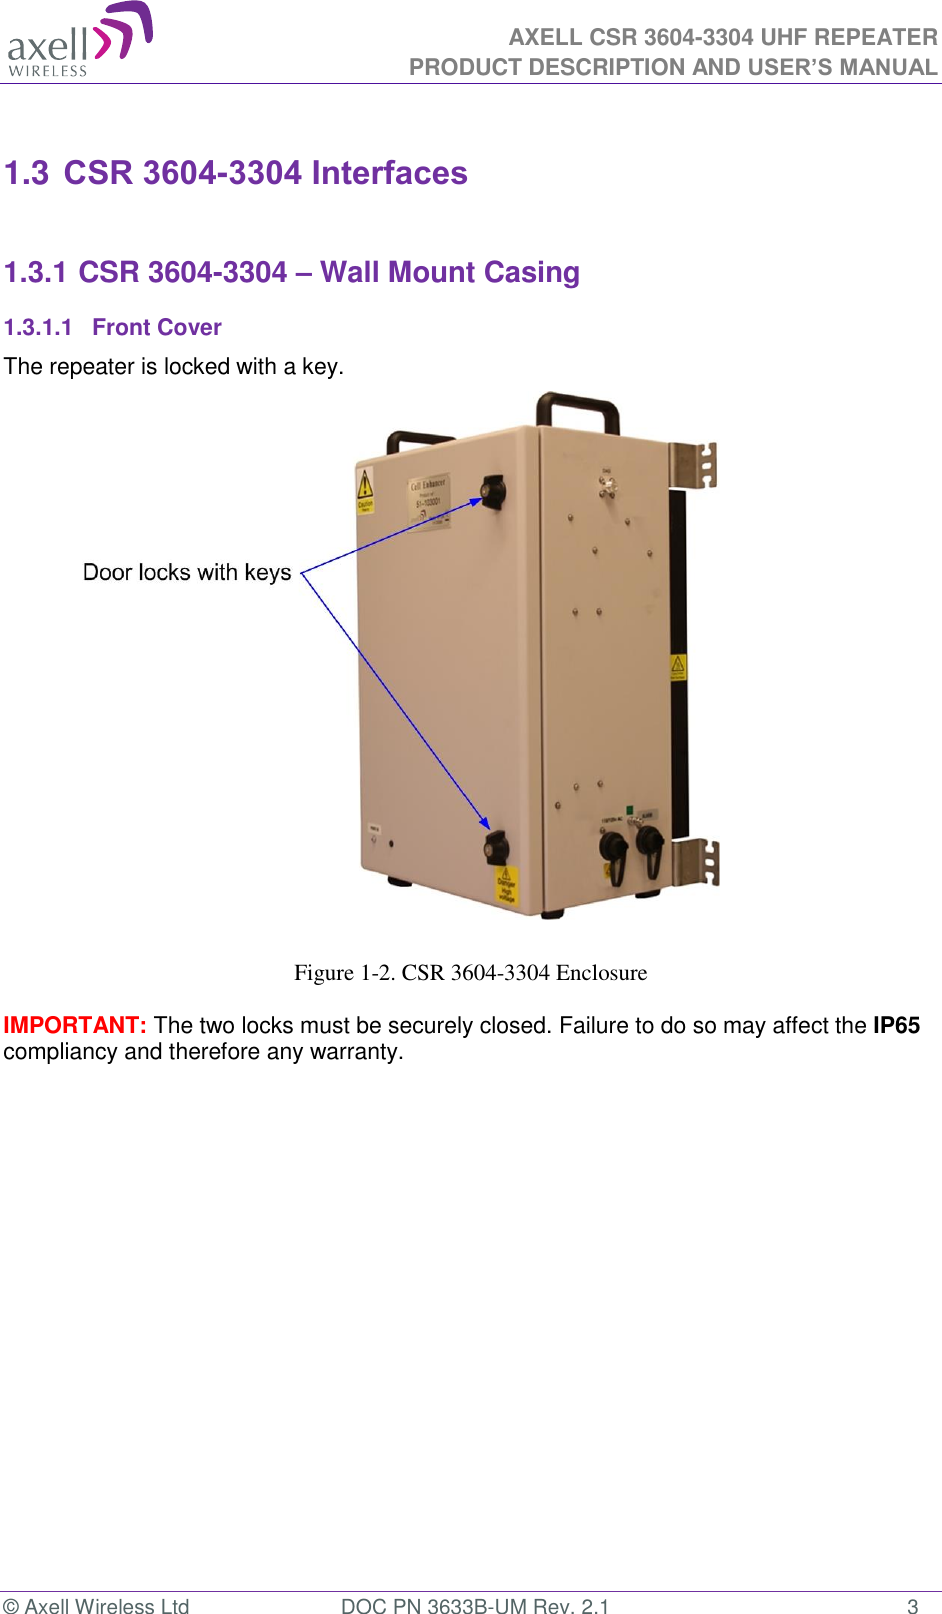  AXELL CSR 3604-3304 UHF REPEATER PRODUCT DESCRIPTION AND USER’S MANUAL  © Axell Wireless Ltd  DOC PN 3633B-UM Rev. 2.1  3  1.3 CSR 3604-3304 Interfaces  1.3.1 CSR 3604-3304 – Wall Mount Casing 1.3.1.1  Front Cover The repeater is locked with a key.                       Figure 1-2. CSR 3604-3304 Enclosure  IMPORTANT: The two locks must be securely closed. Failure to do so may affect the IP65 compliancy and therefore any warranty.       